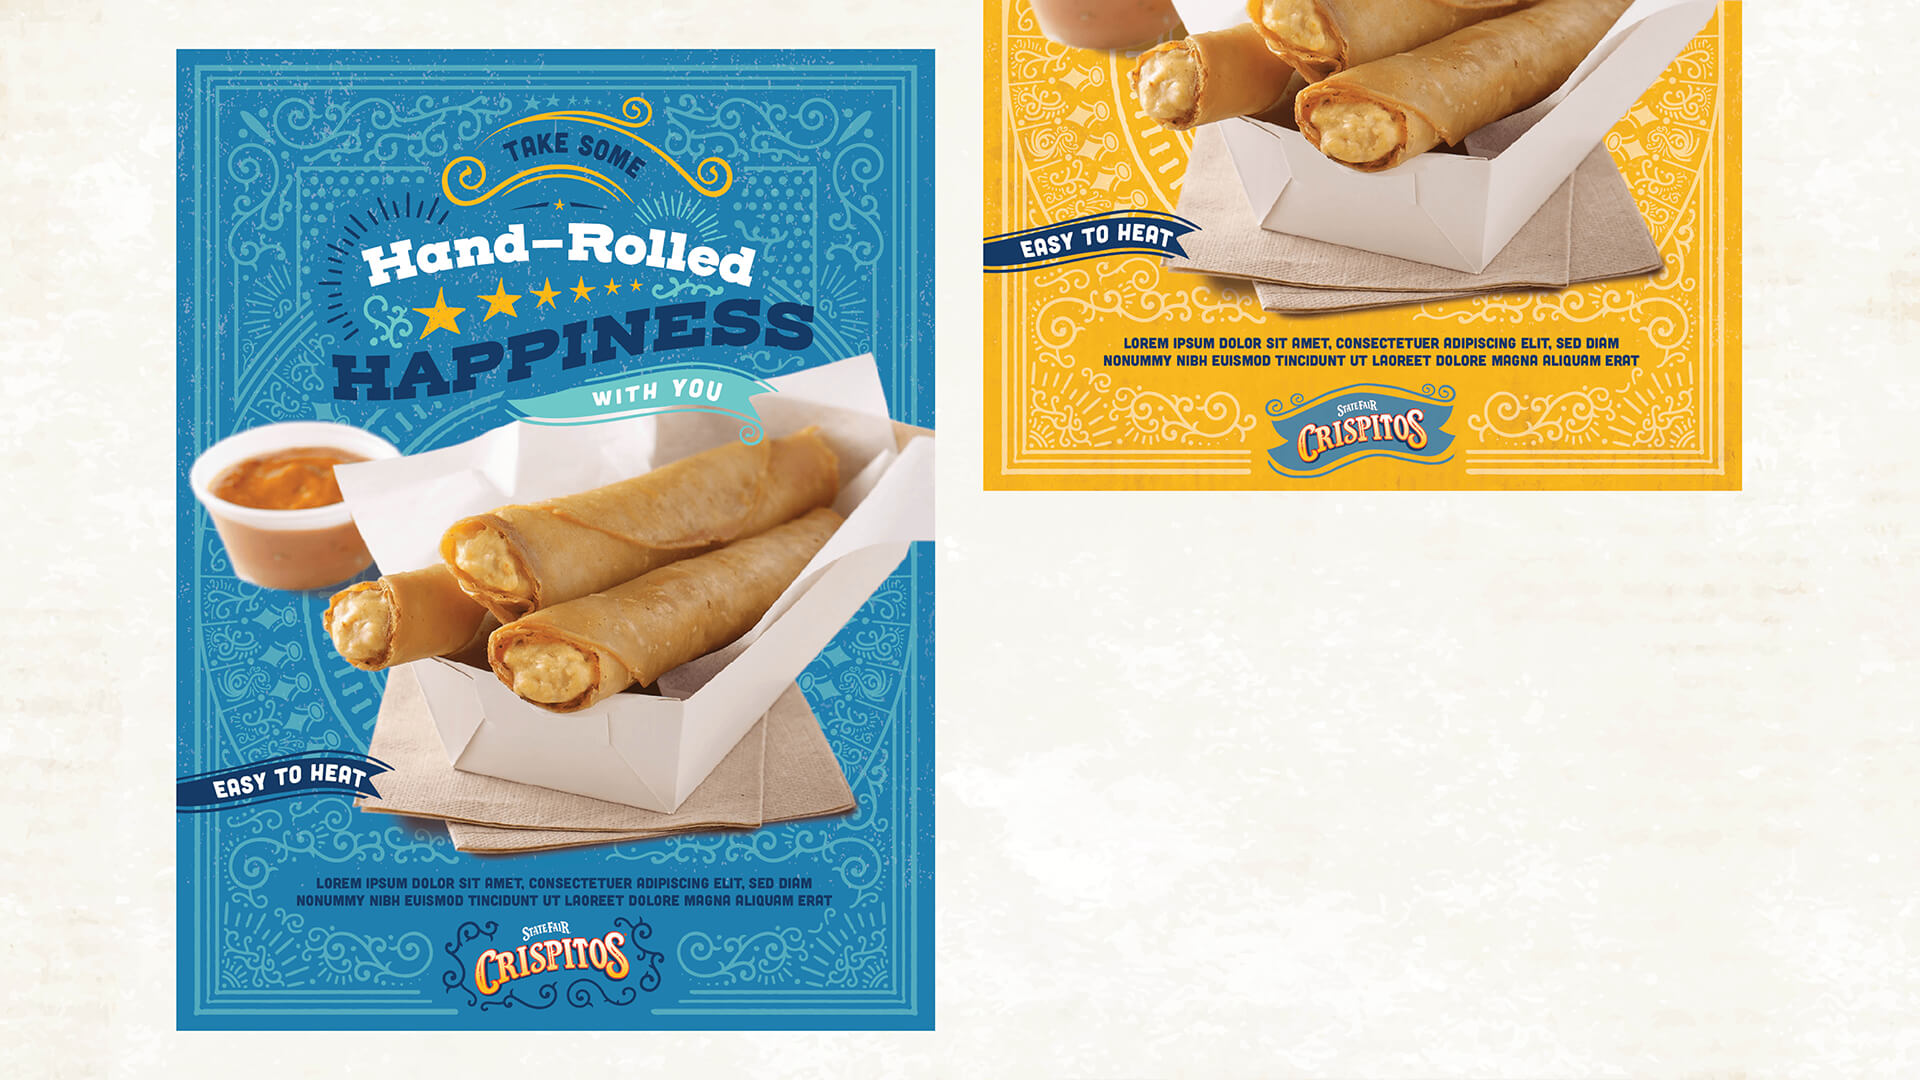 State Fair Crispitos Hand Rolled Happiness With You